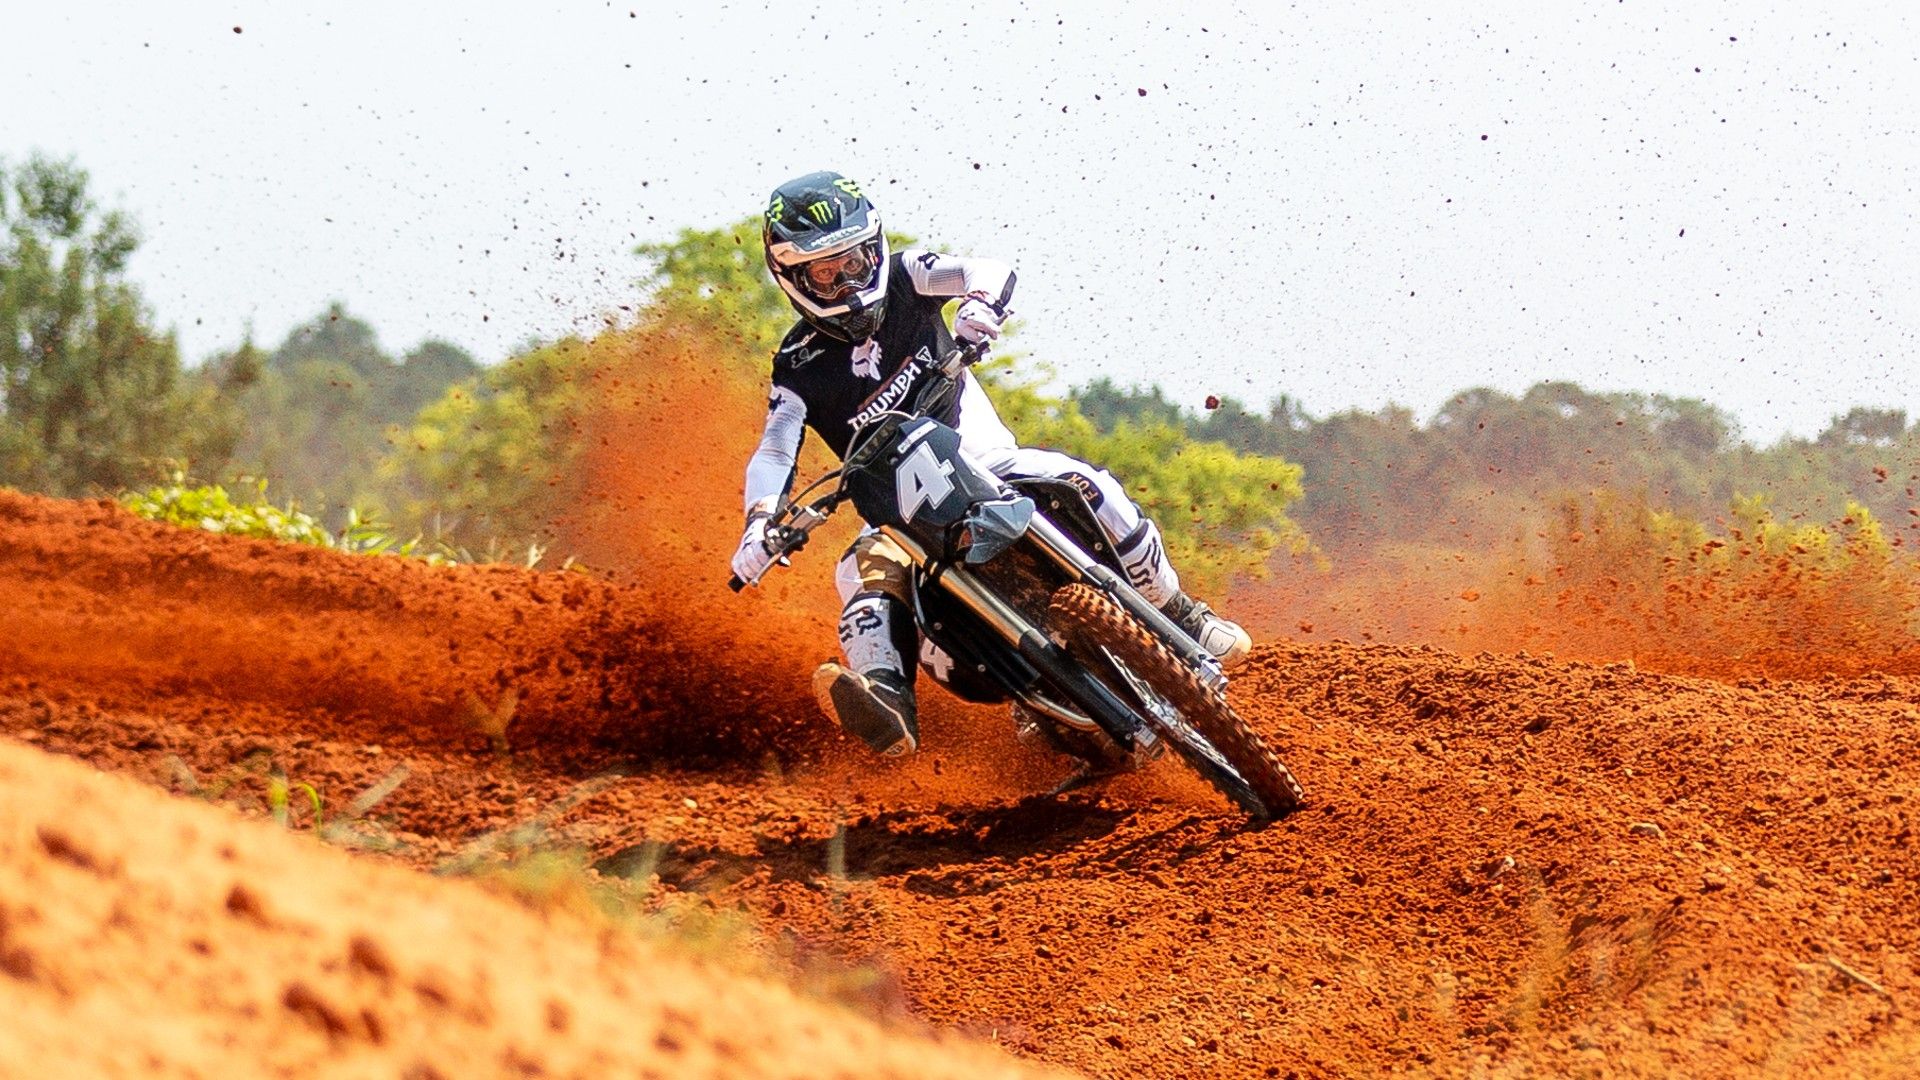 Triumphs New Motocross Bike Shows Its Prowess On The Dirt Track